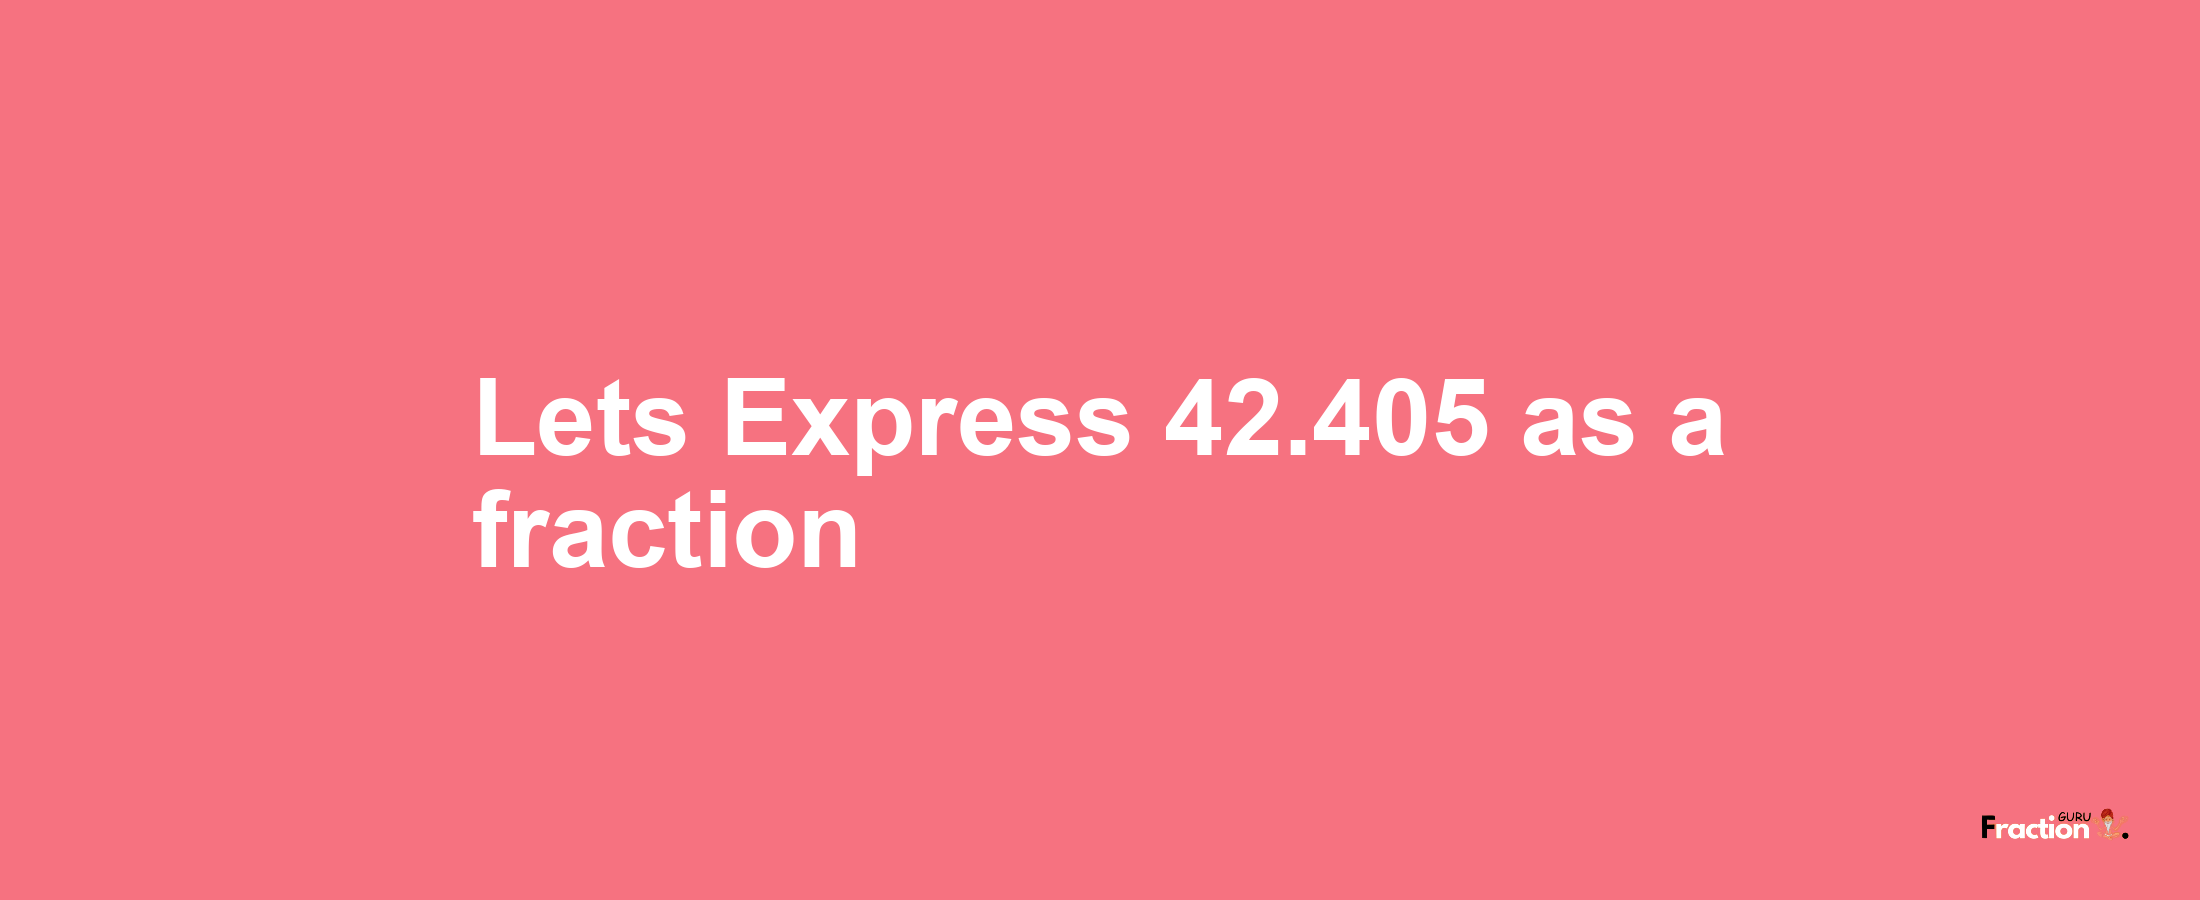 Lets Express 42.405 as afraction